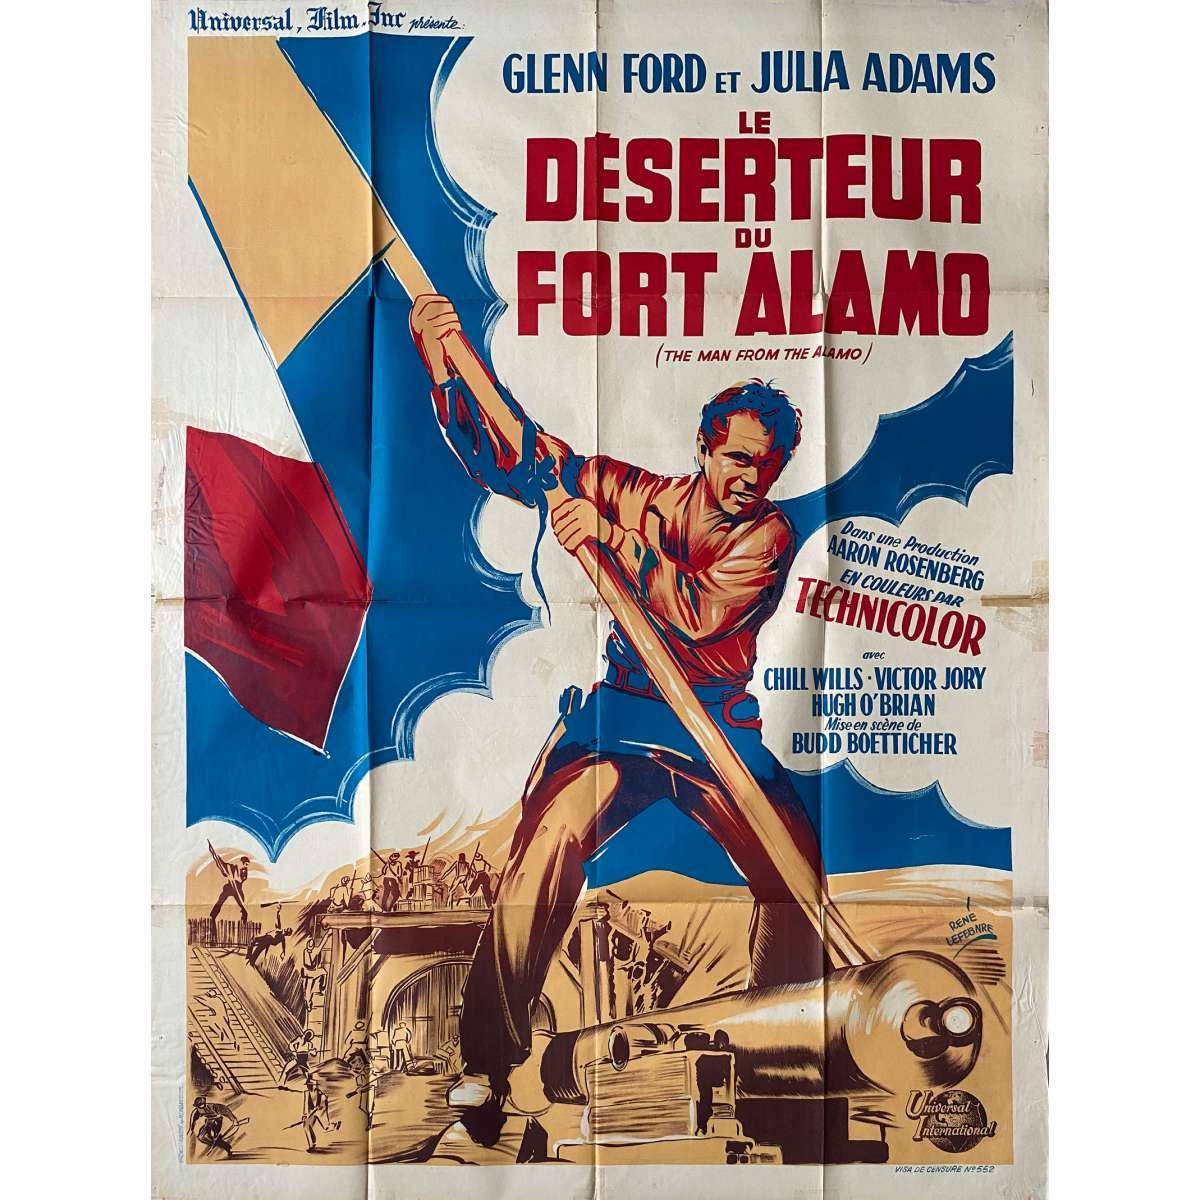 The Man From The Alamo 1953 Poster Art Wallpaper